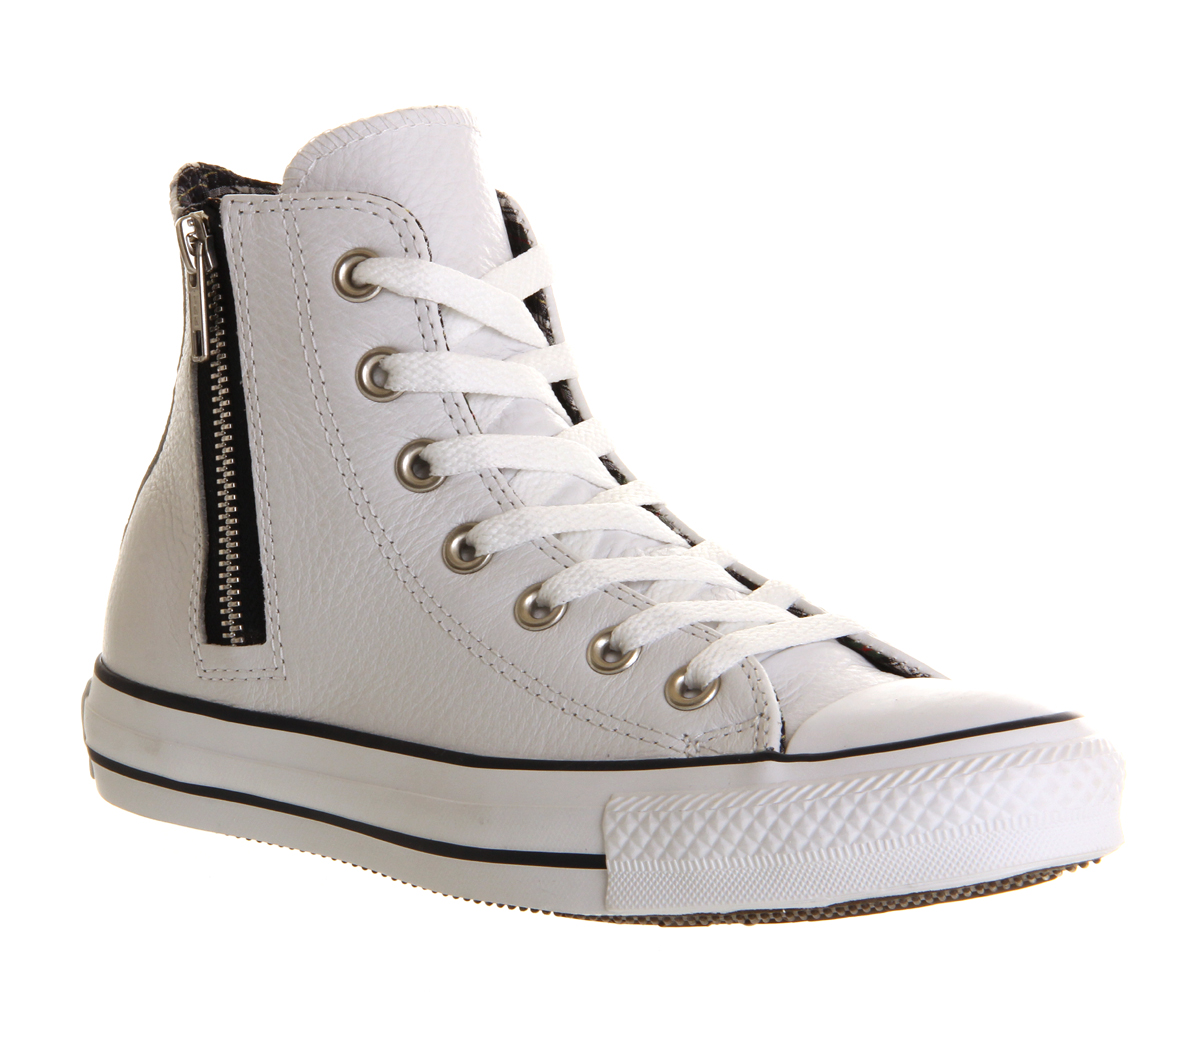 Converse Ctas Side Zip White St - Hers trainers